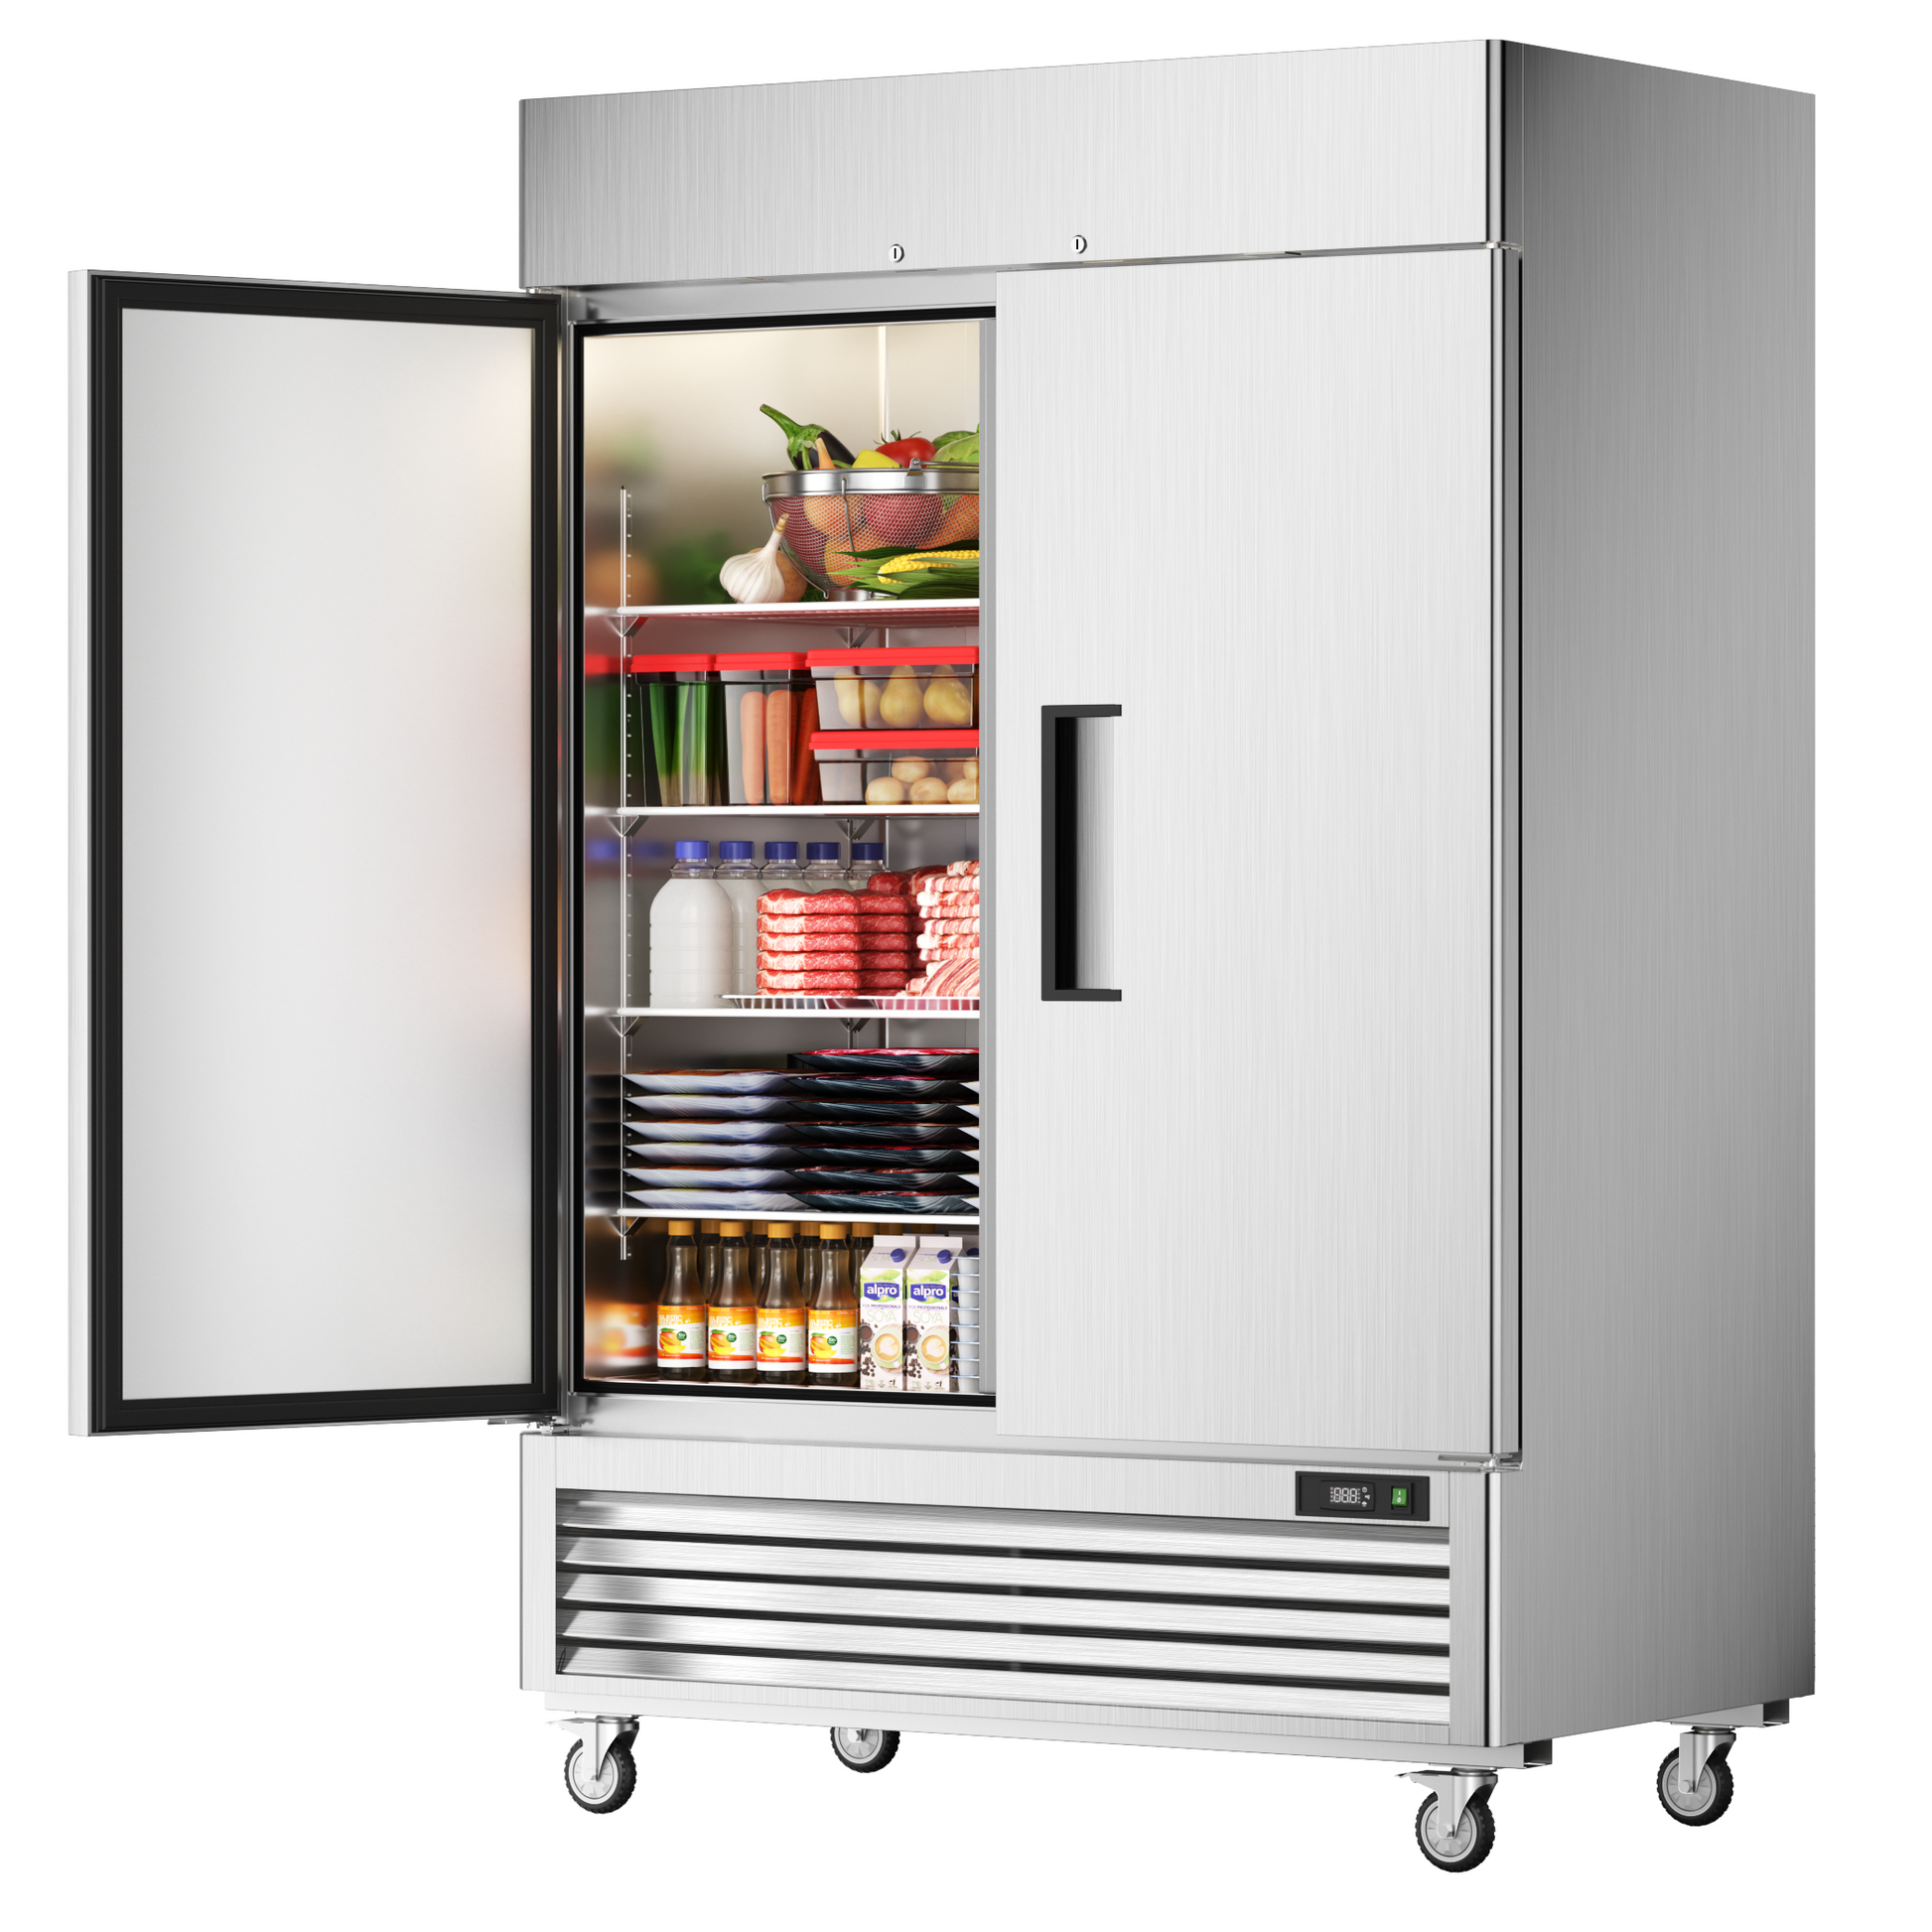 Built-In Refrigerators and Coolers - WSJ